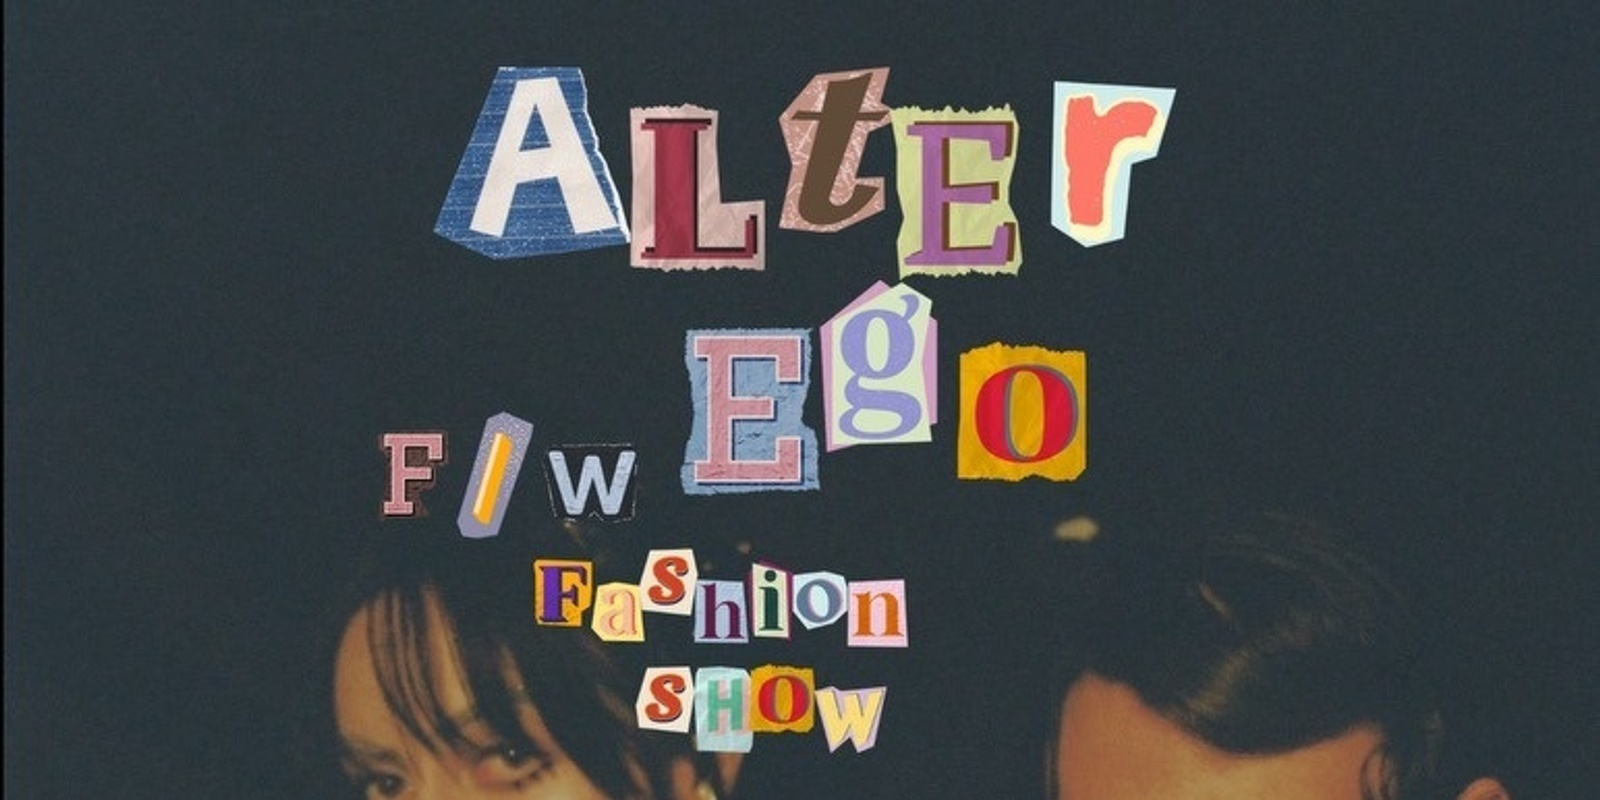 Banner image for ALTER EGO F/W FASHION SHOW